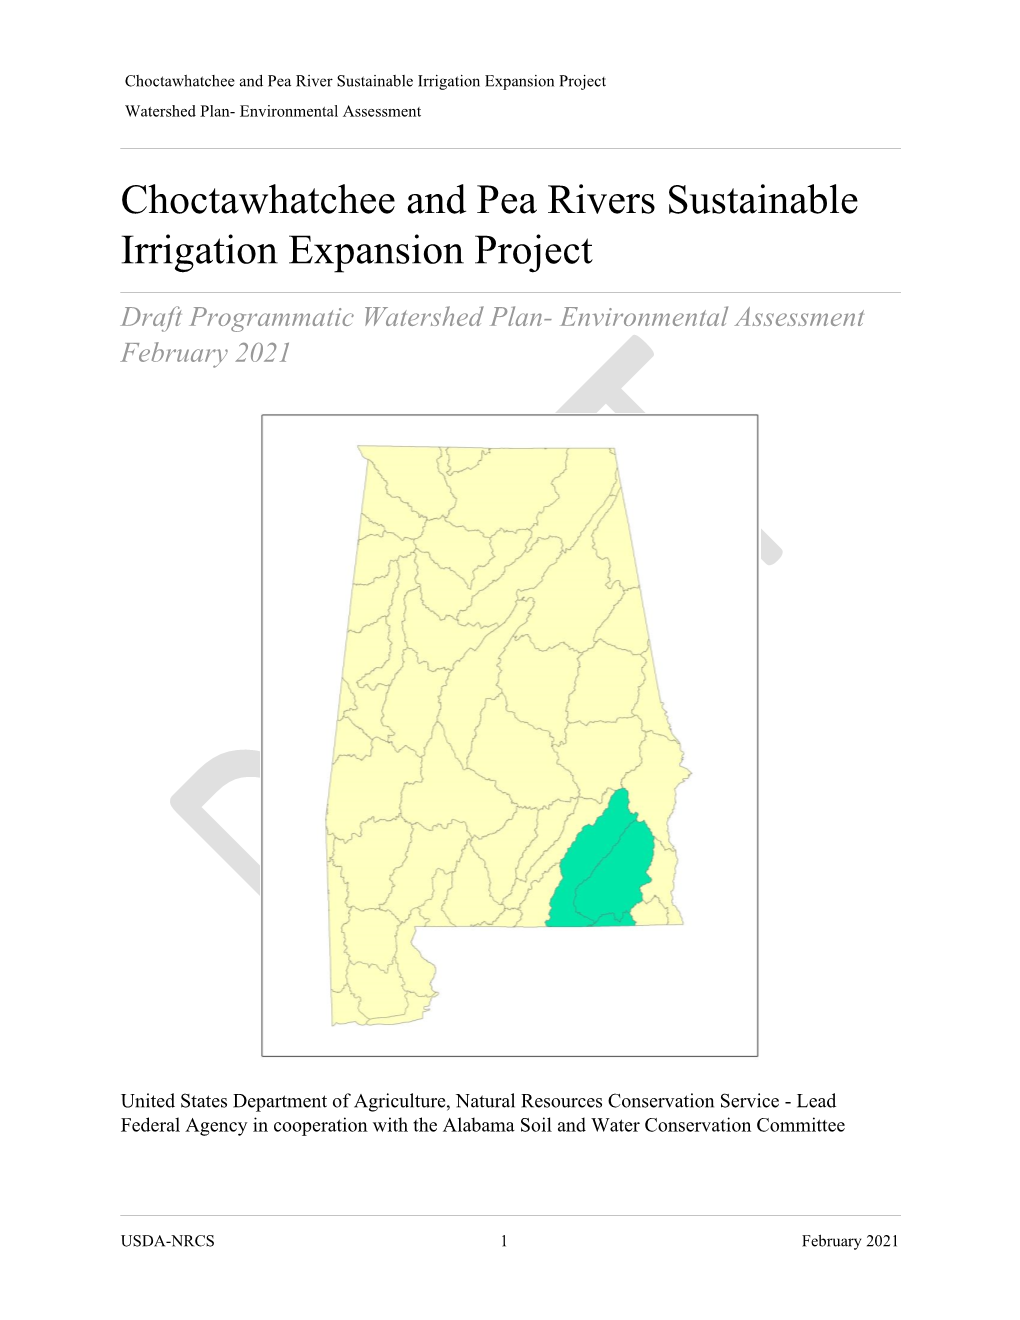 Choctawhatchee and Pea Rivers Sustainable Irrigation Expansion Project